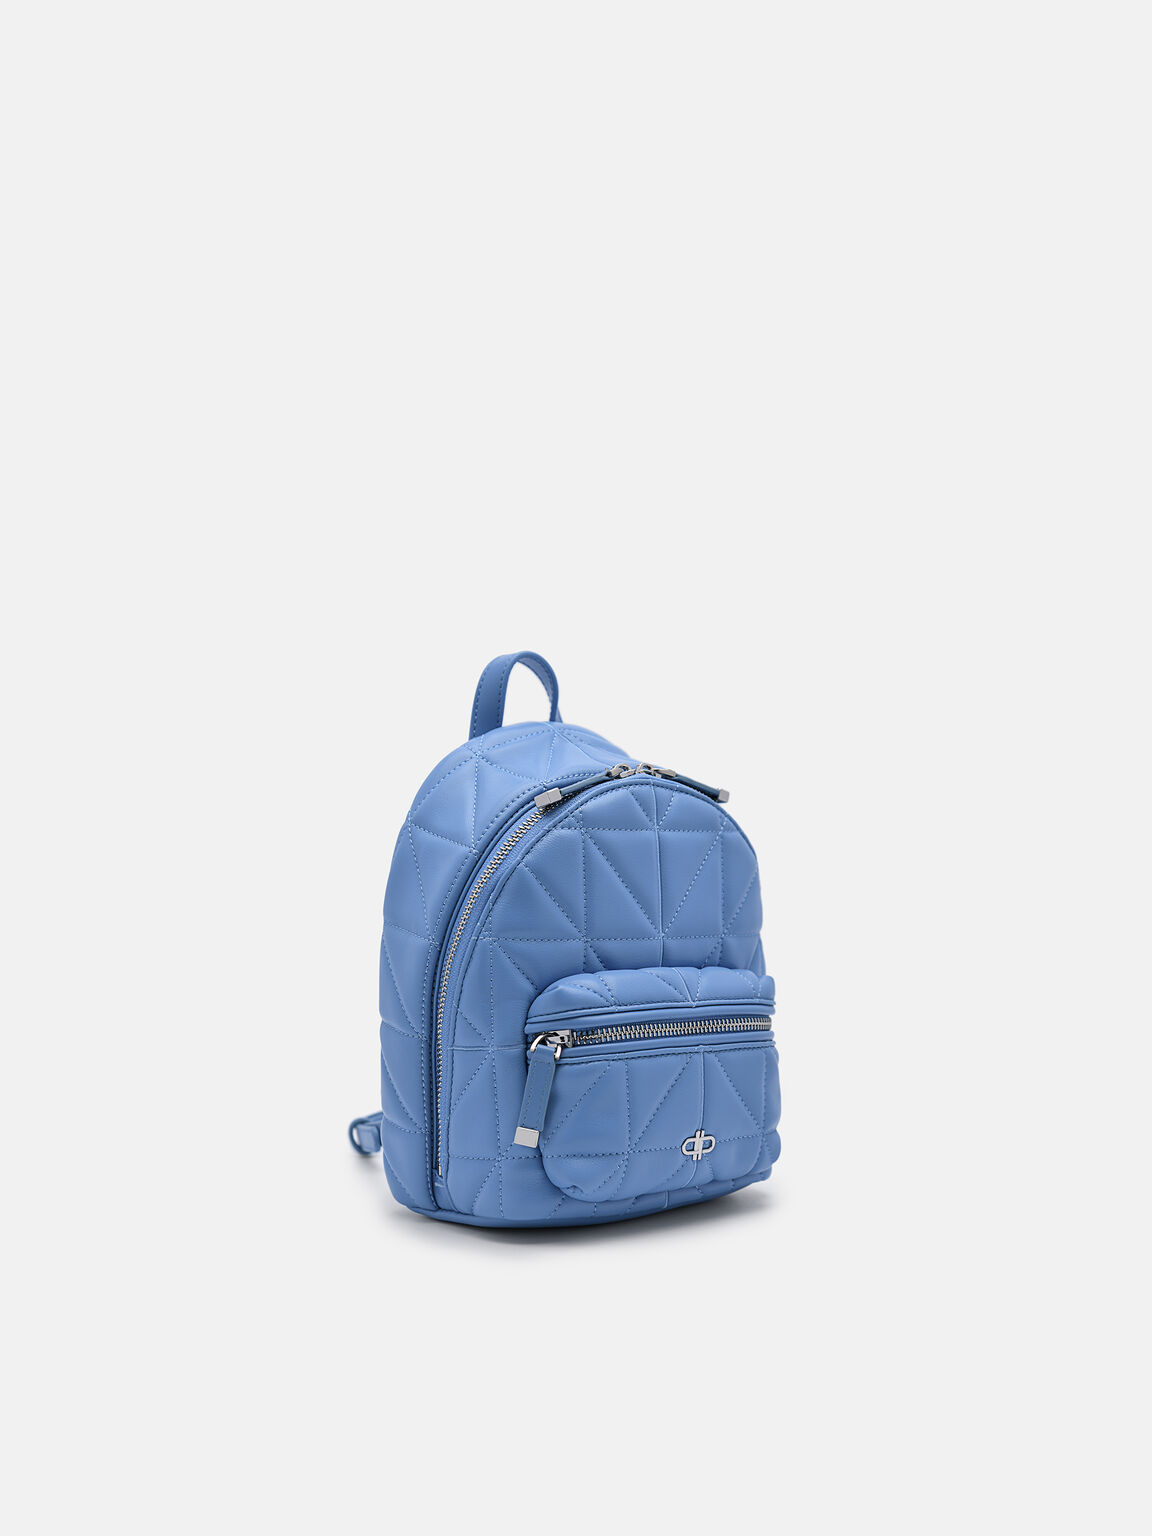 PEDRO Icon Mini Backpack in Pixel, Blue, hi-res